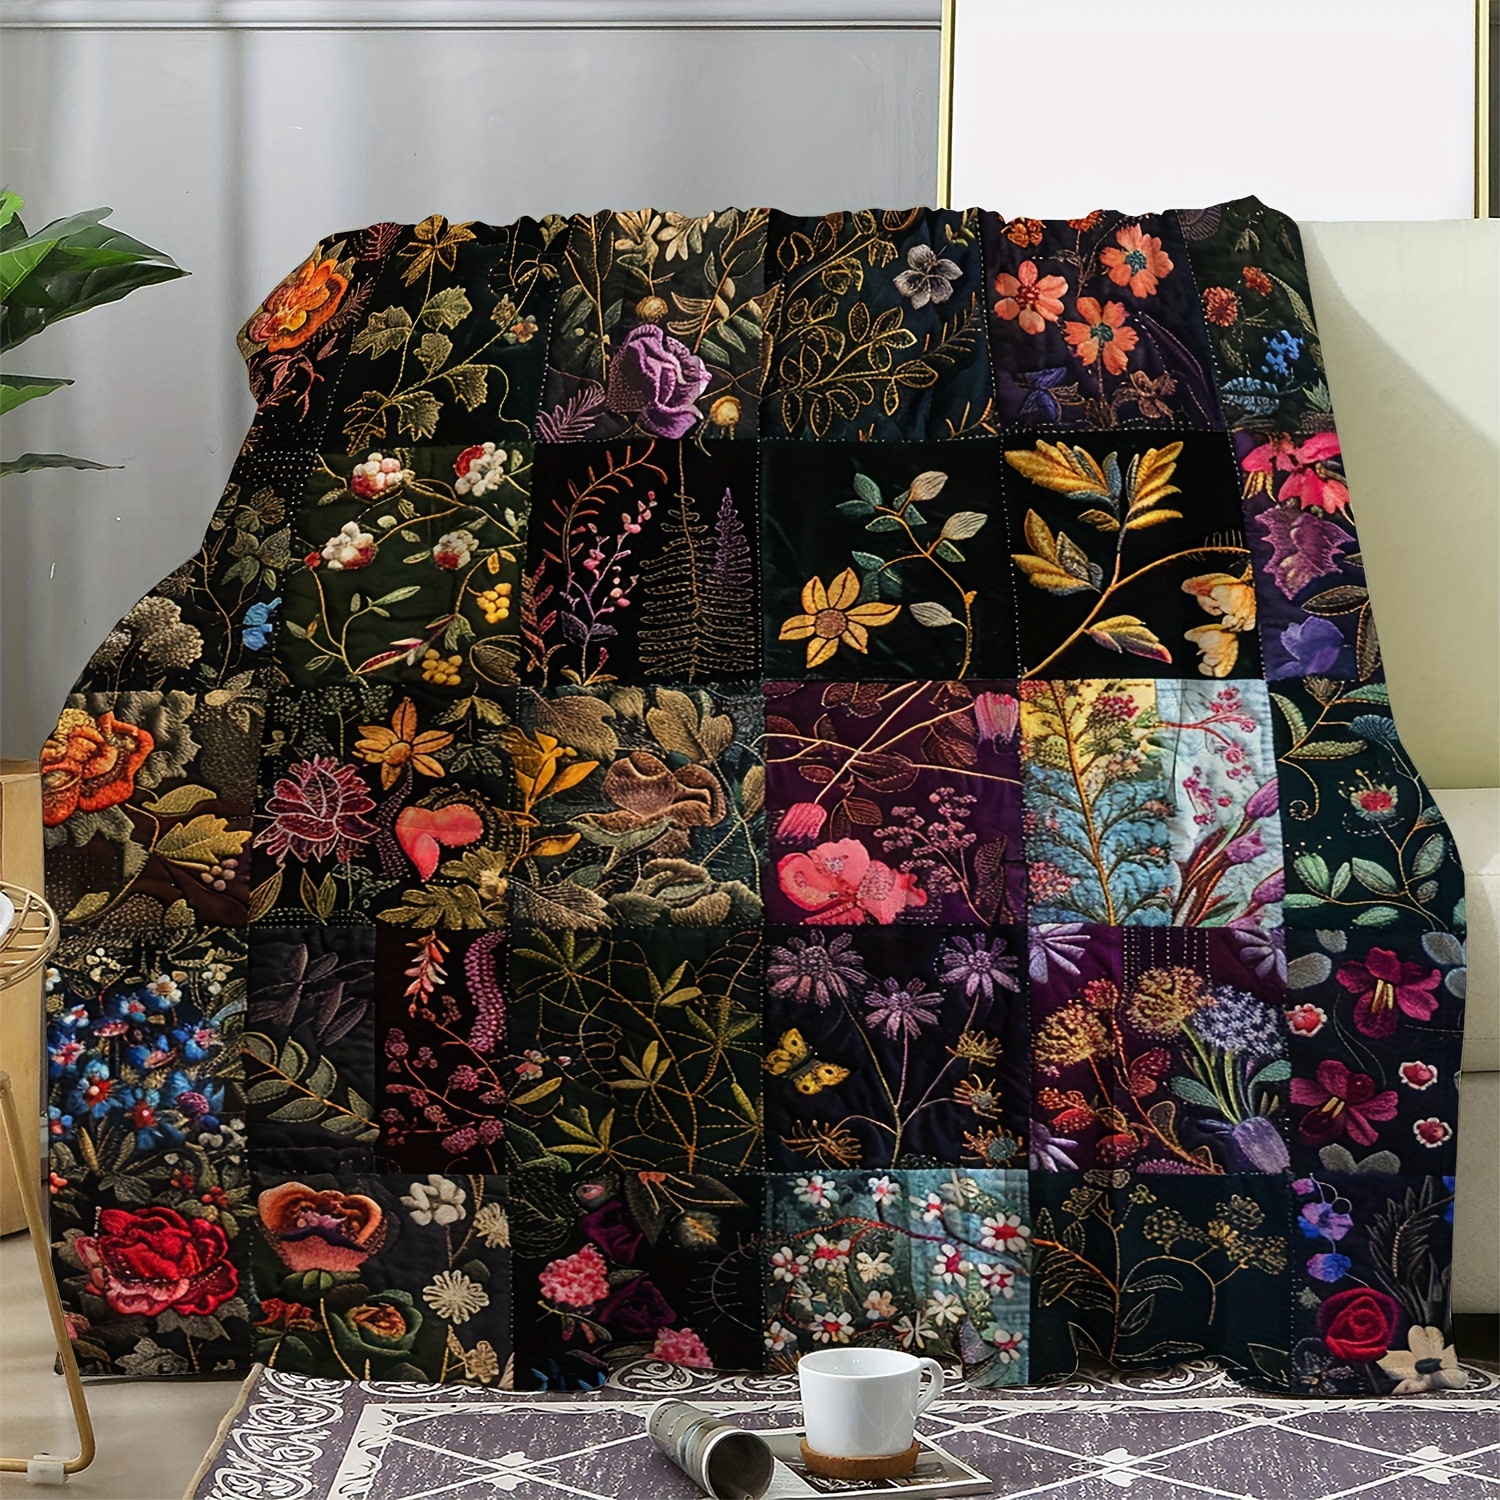 

Vintage Rectangular Patchwork Blanket With Greenery And Floral Prints - Soft And Comfortable For Sofa, Bed, Car, Office, Camping, Travel, Or As A Gift For All Seasons